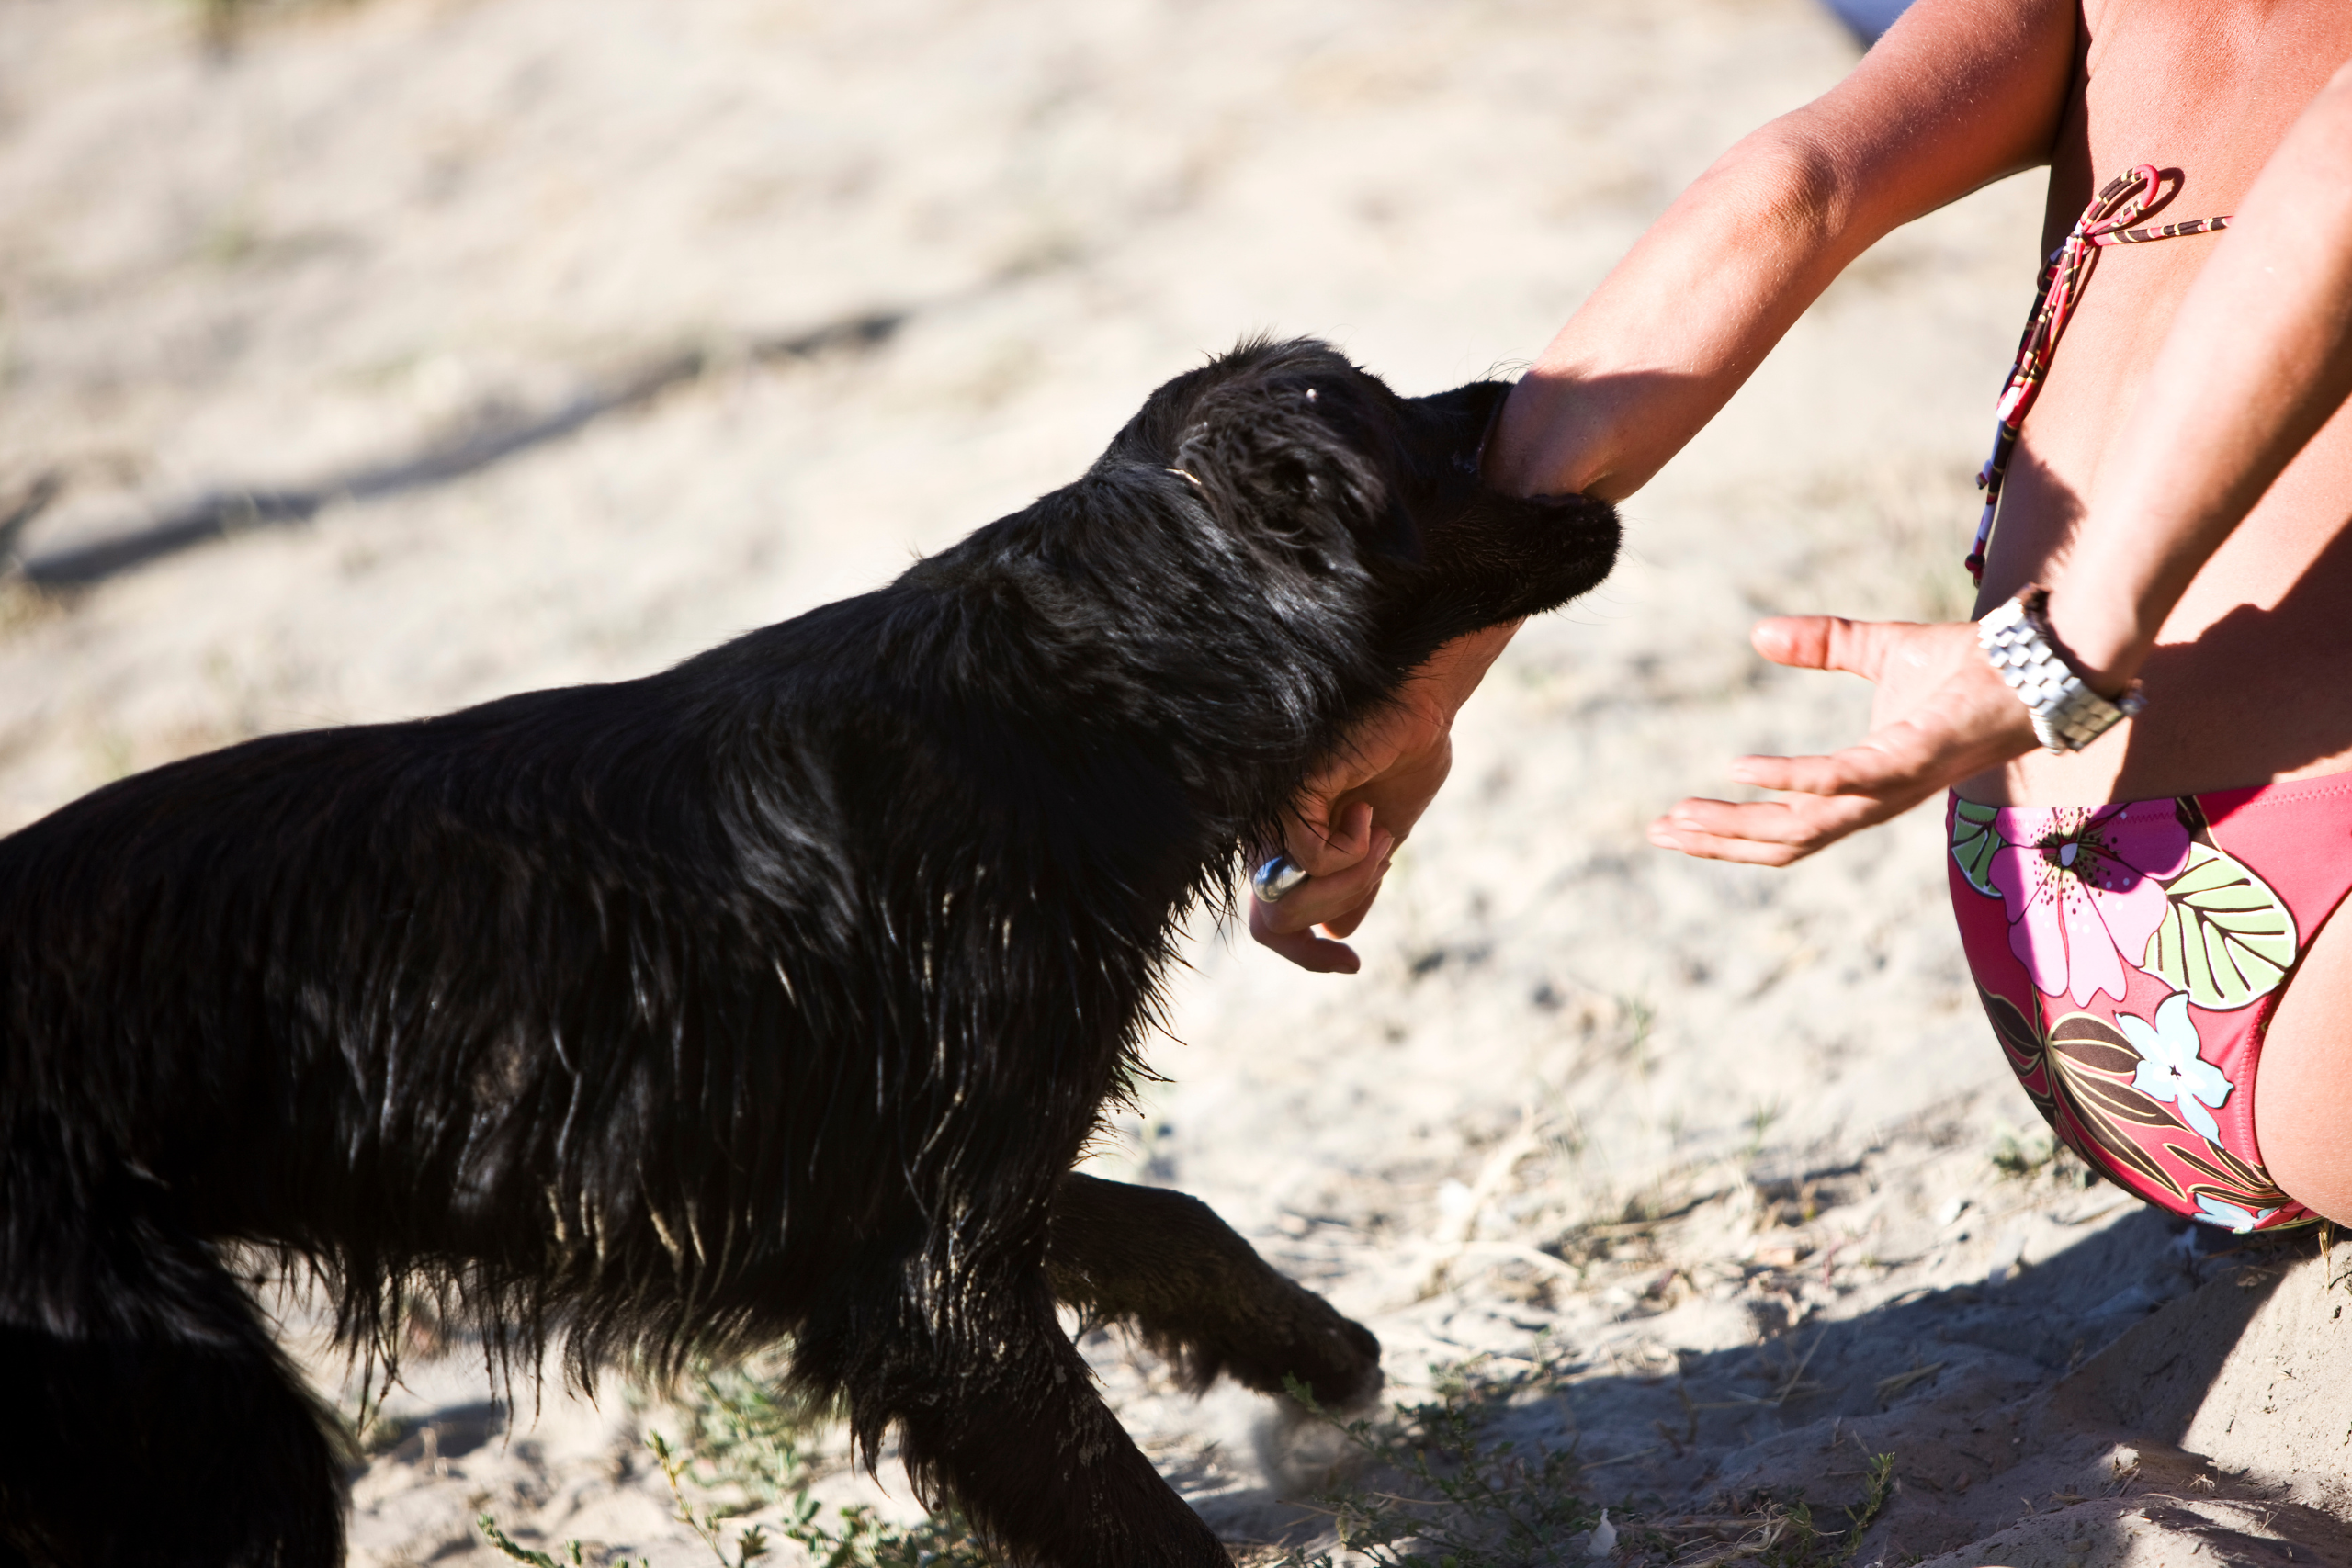 A black dog in mid-motion as it reaches out to a person's outstretched hands on a sandy beach, capturing a potential moment before a dog bite incident, underscoring the importance of understanding and preventing dog bite injuries.